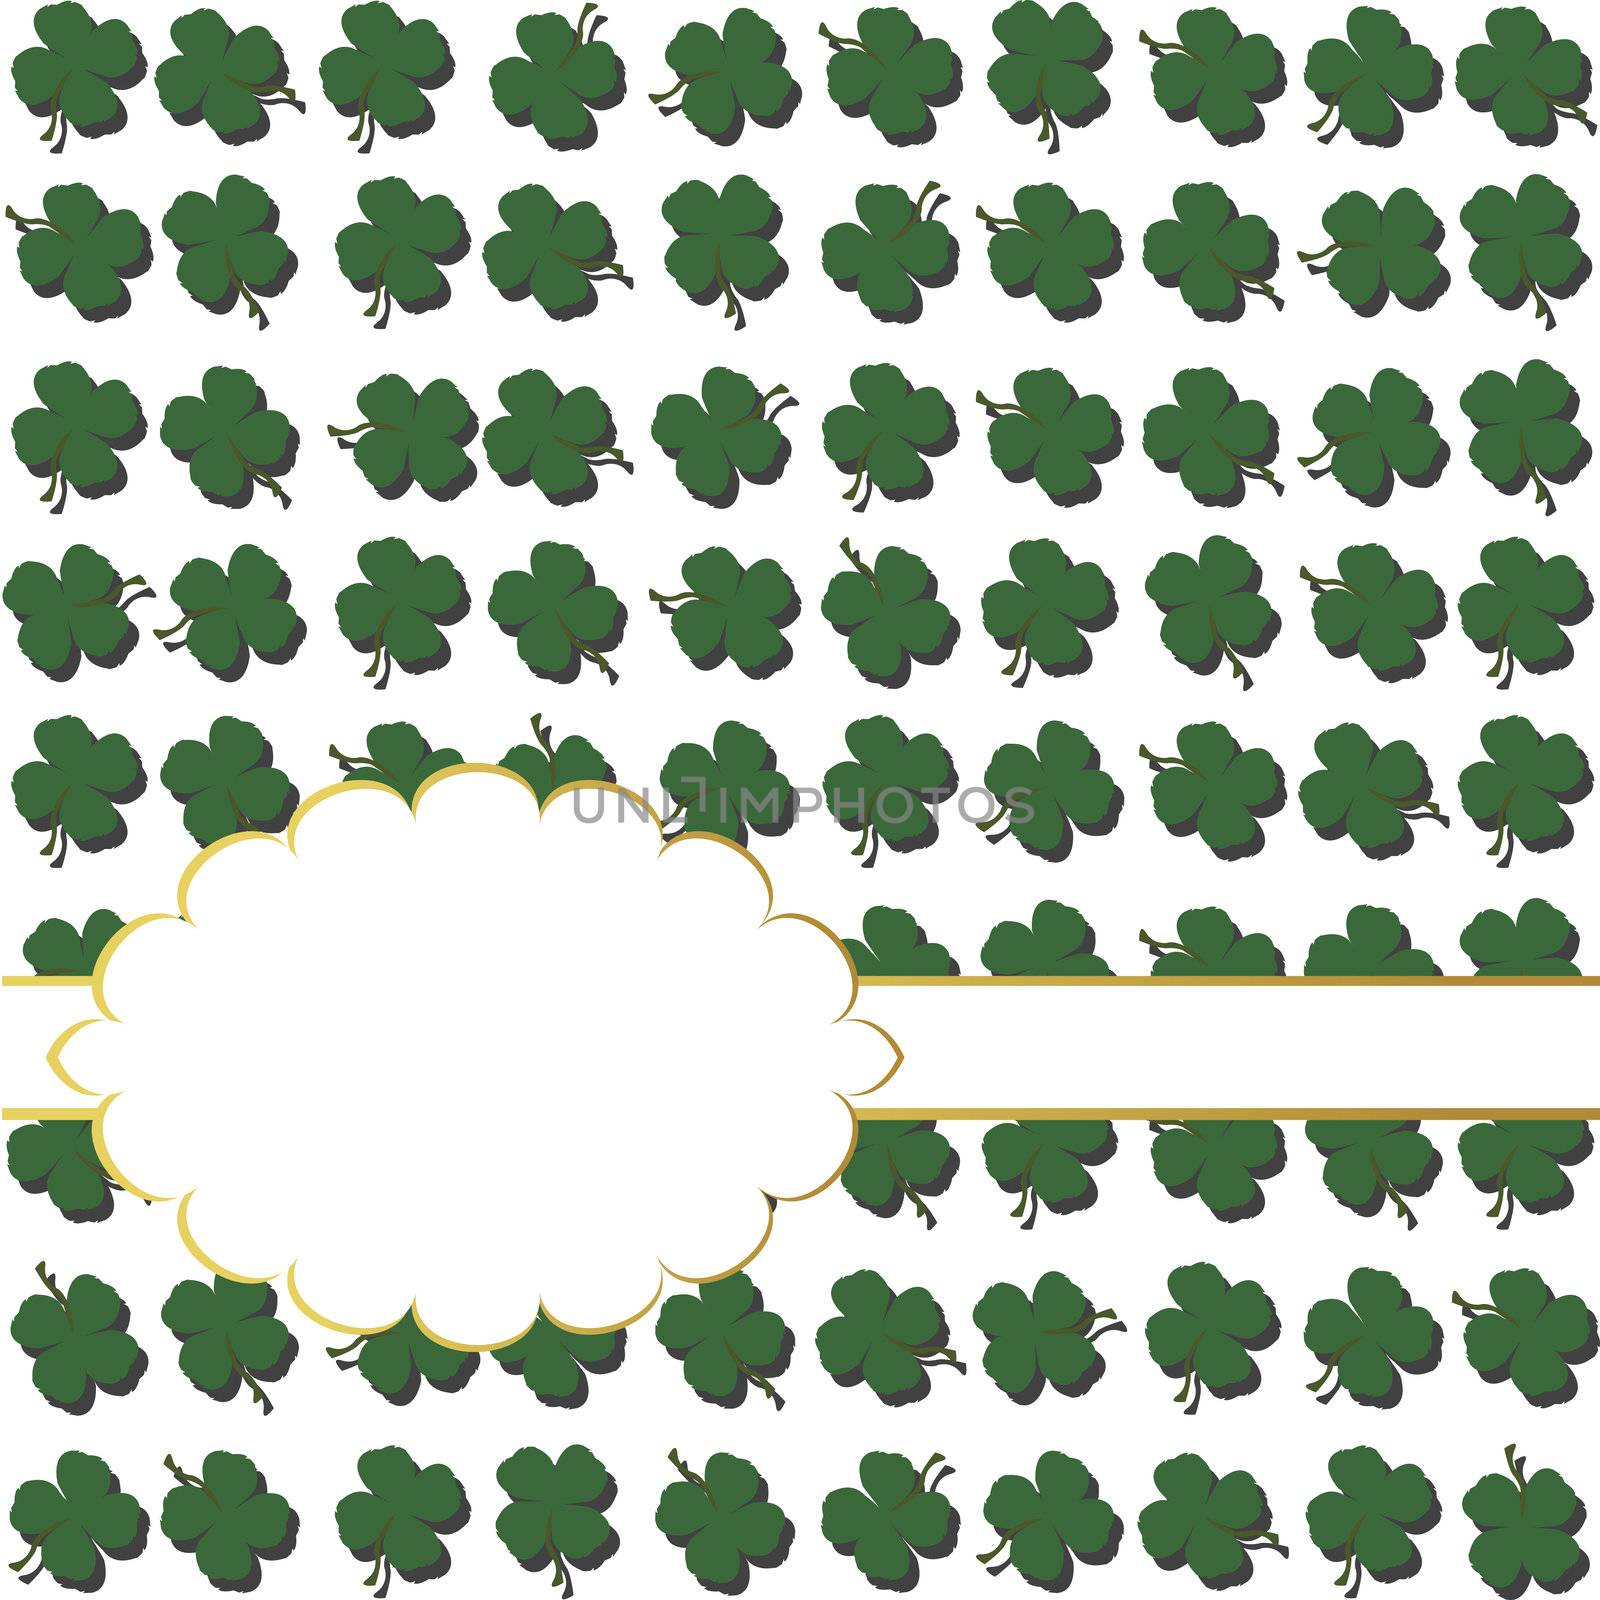 Background with shamrocks and place for text by hibrida13